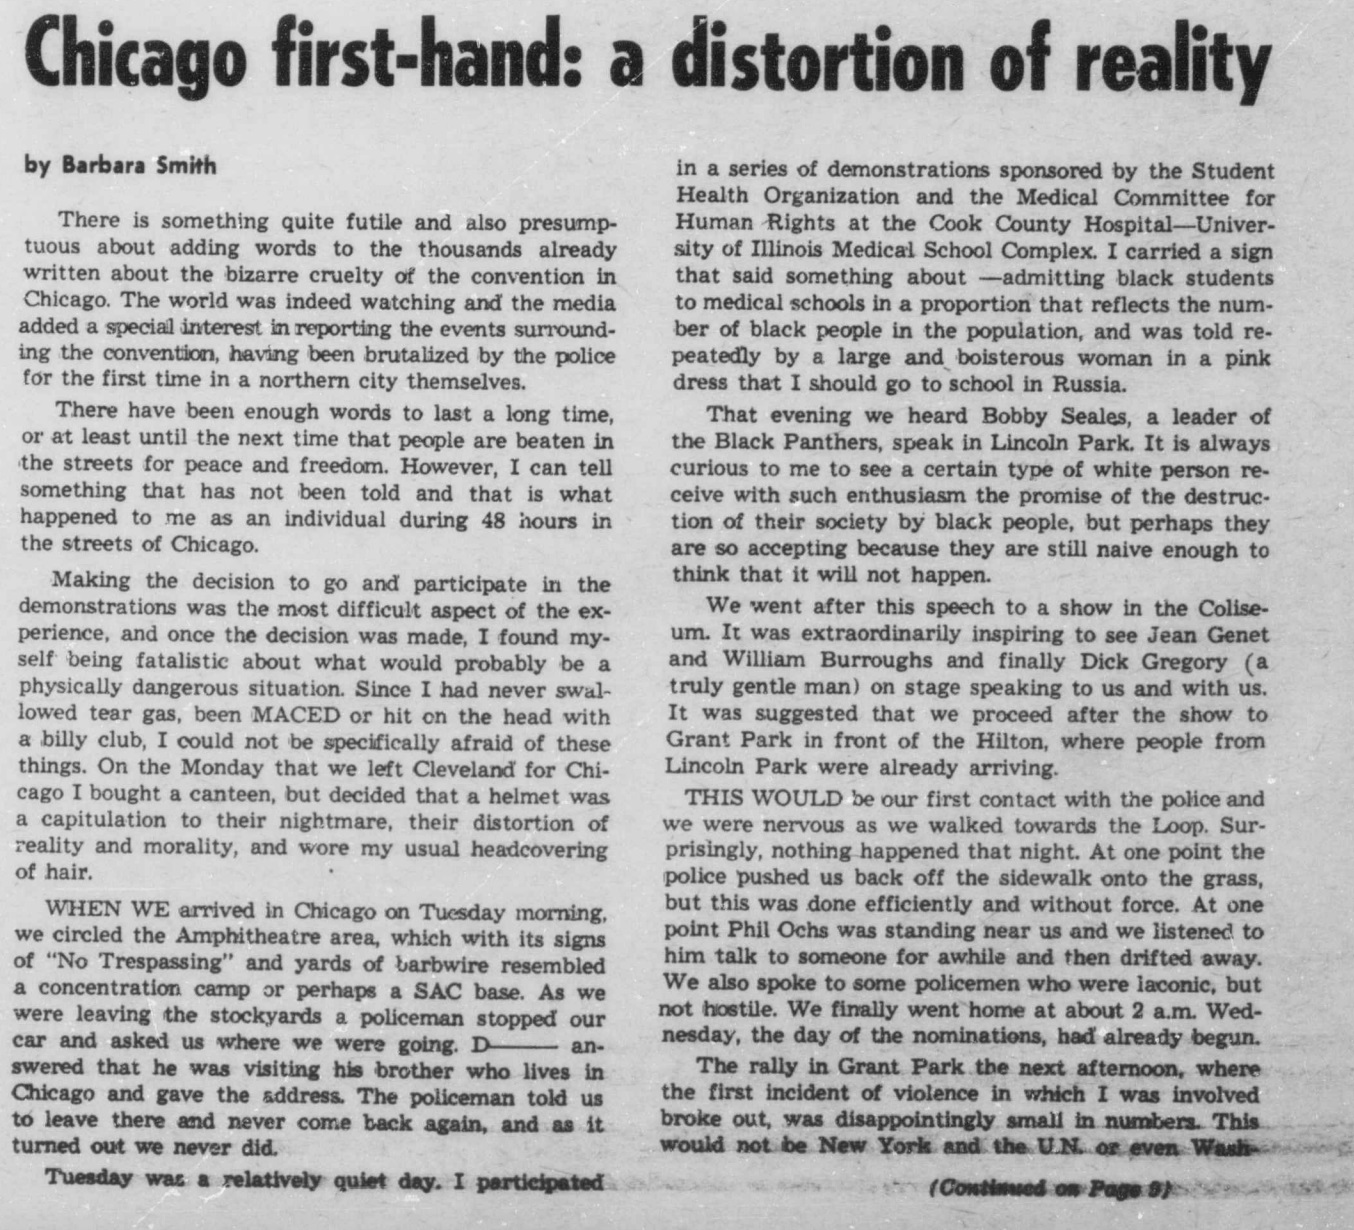 Chicago First-Hand: a Distortion of Reality. Choragos. September 24, 1968. Mount Holyoke College Periodicals, Student Newspaper.